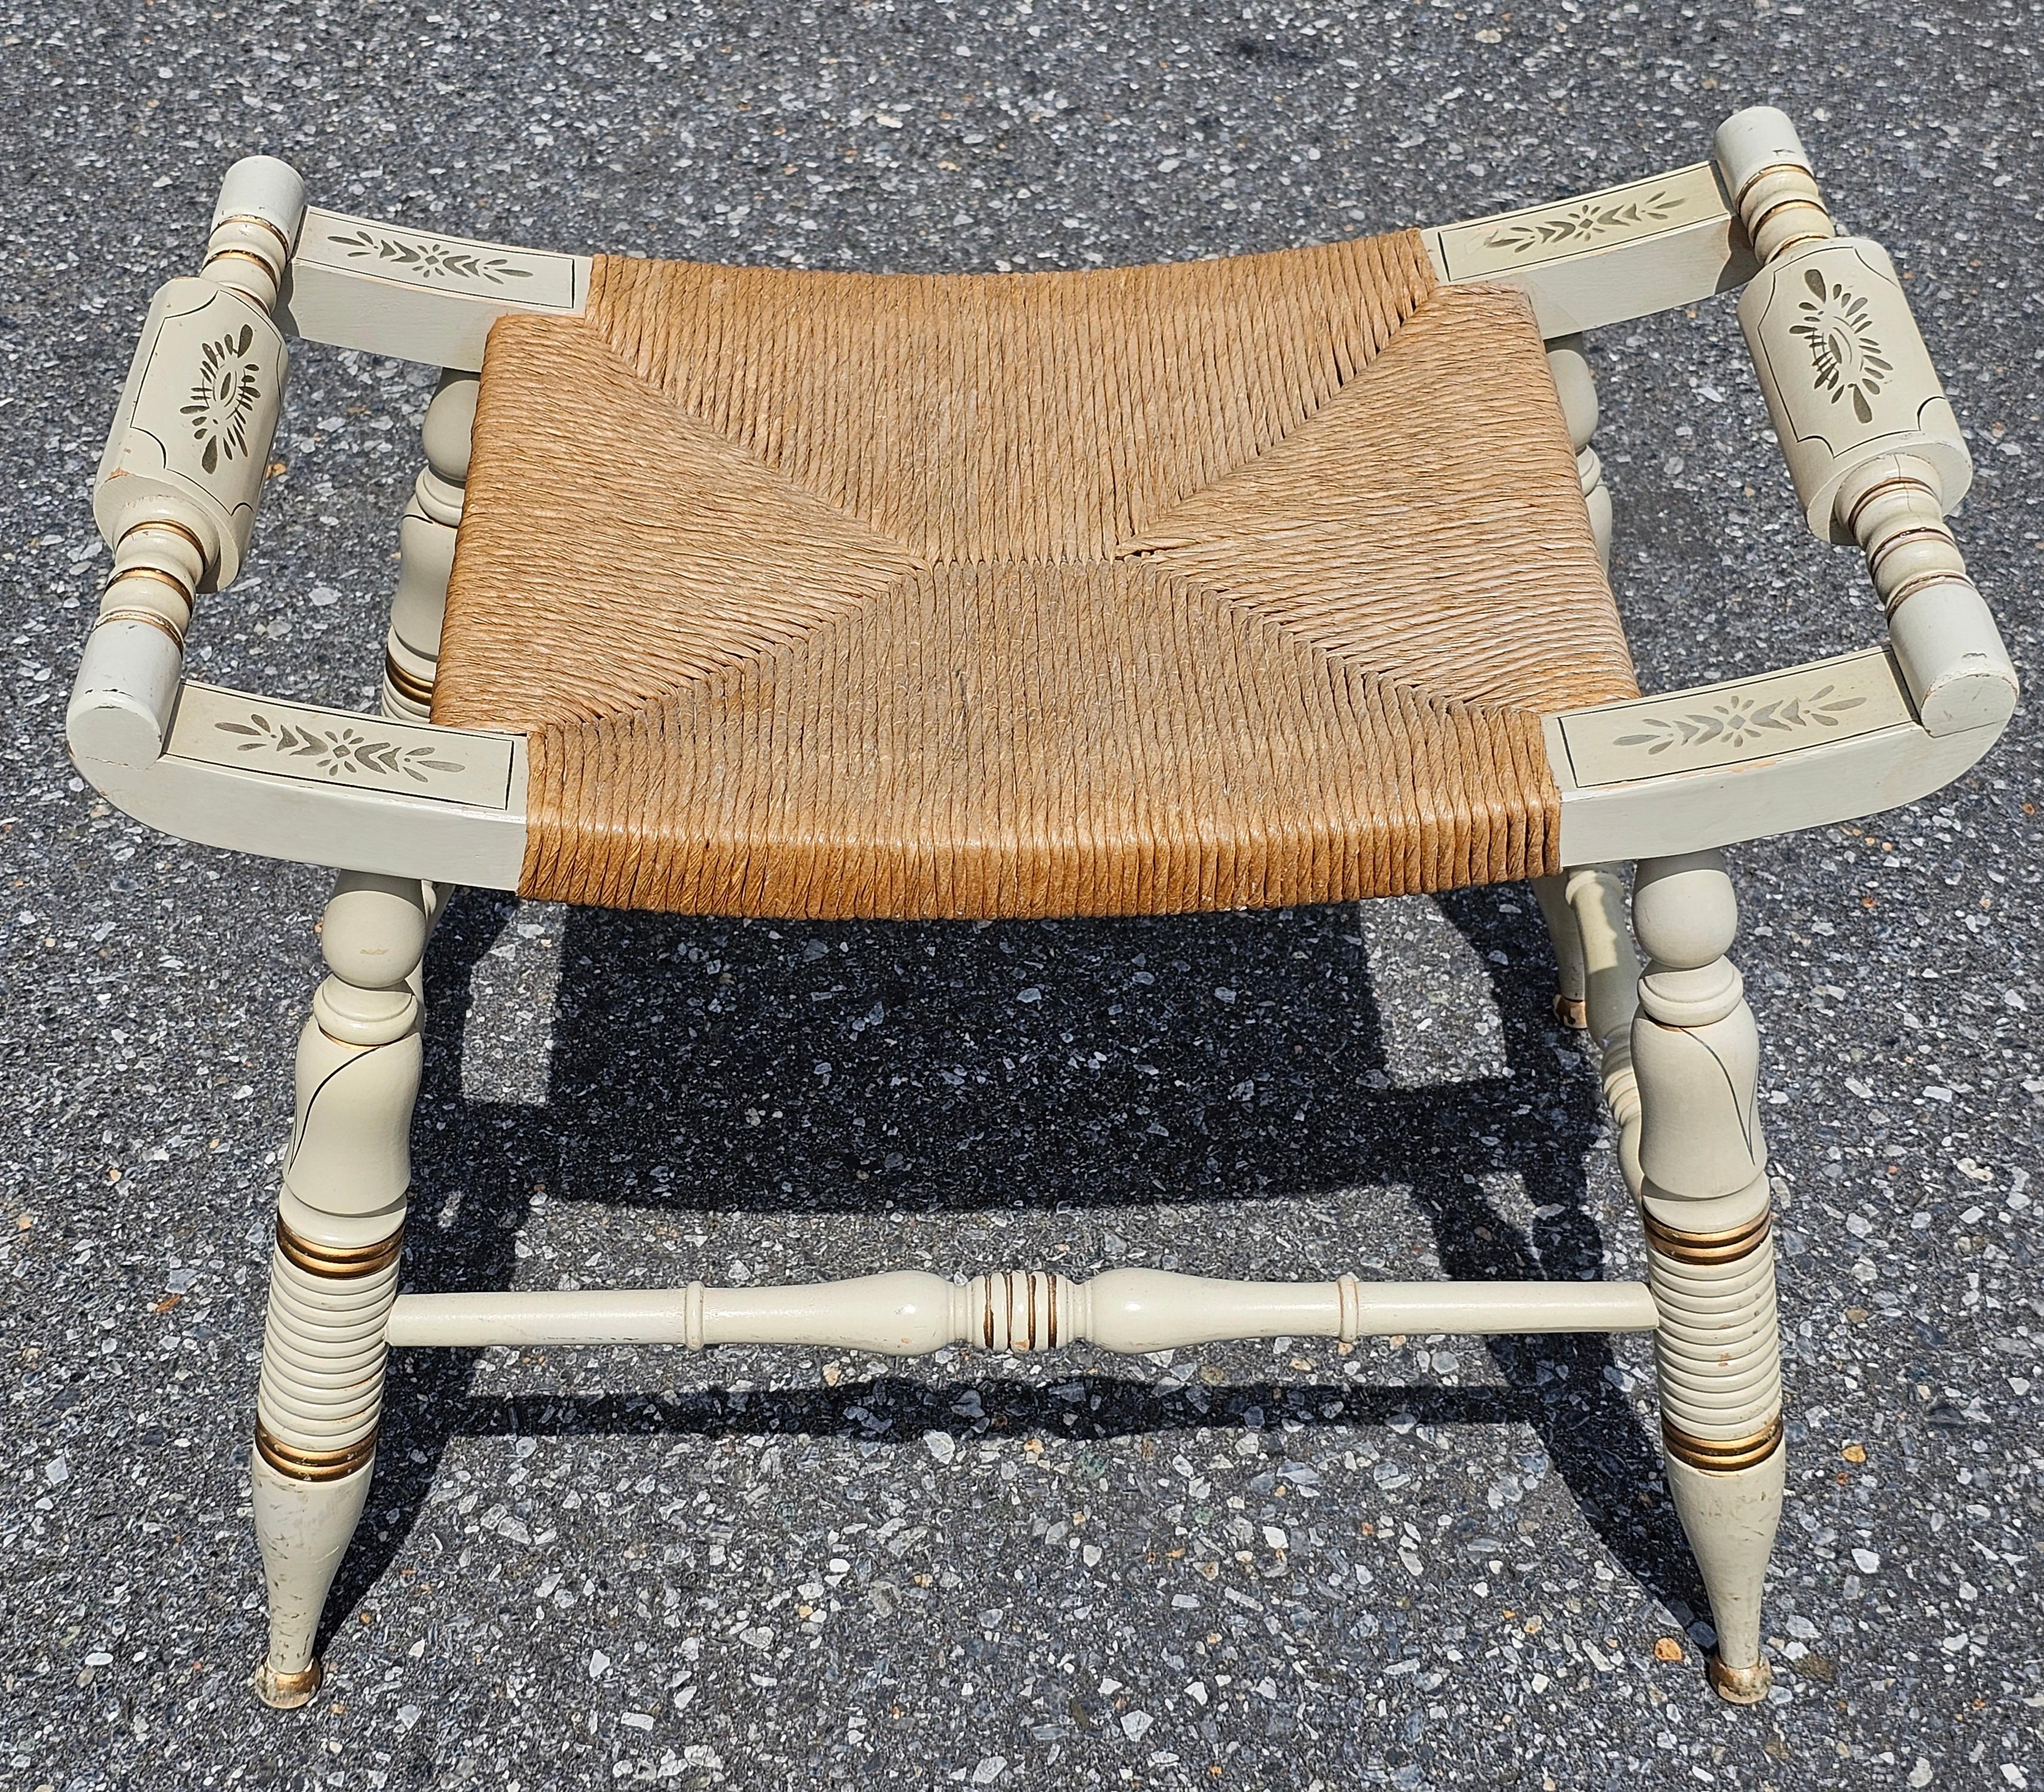 20th Century Hitchcock Style Partial Gilt And Enamel Painted Rush Seat Bench  For Sale